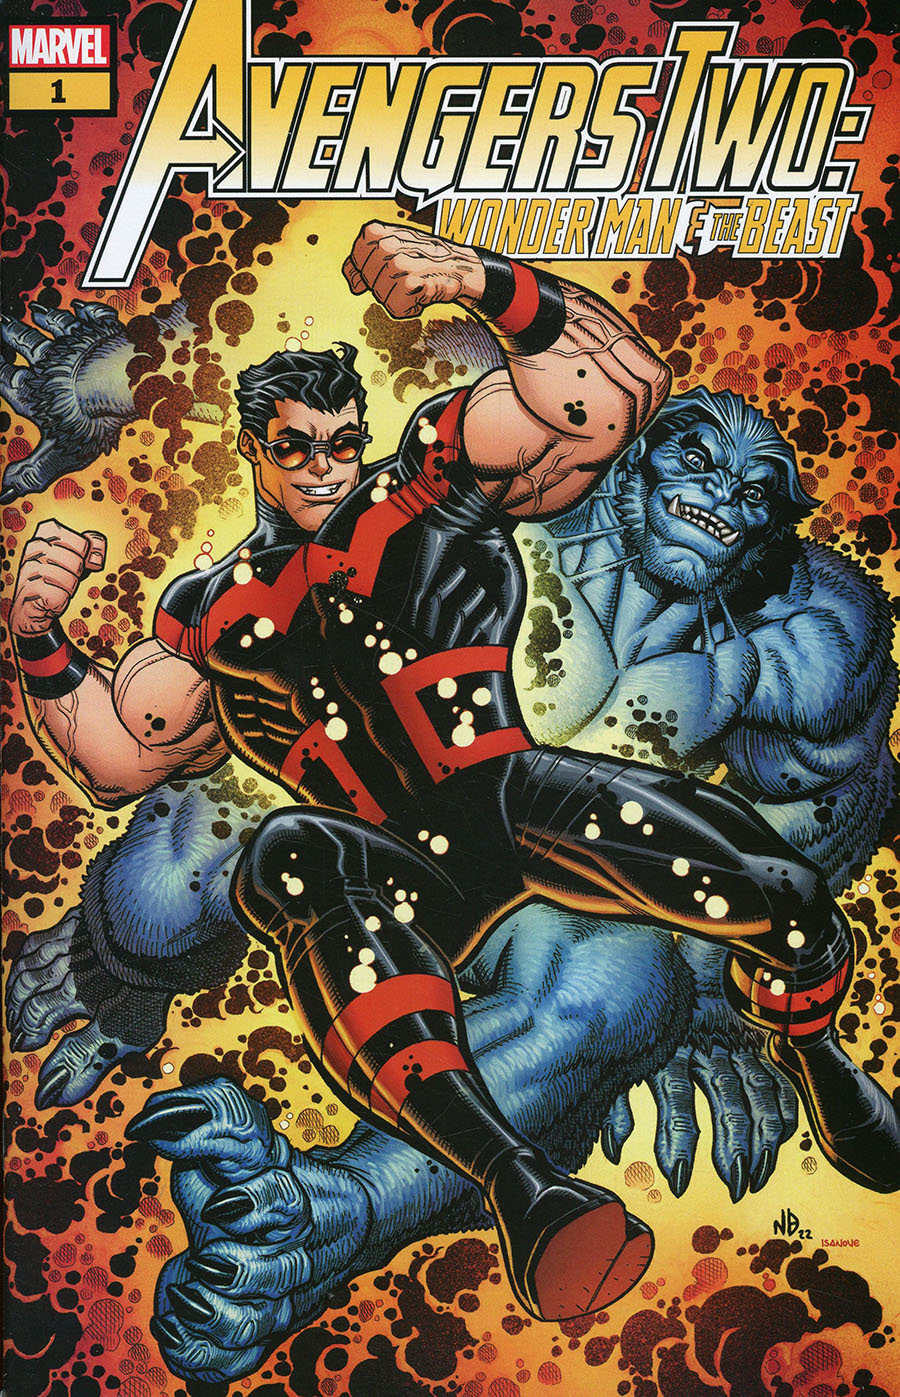 Avengers Two Wonder Man And Beast Marvel Tales #1 (One Shot) Cover A Regular Nick Bradshaw Cover